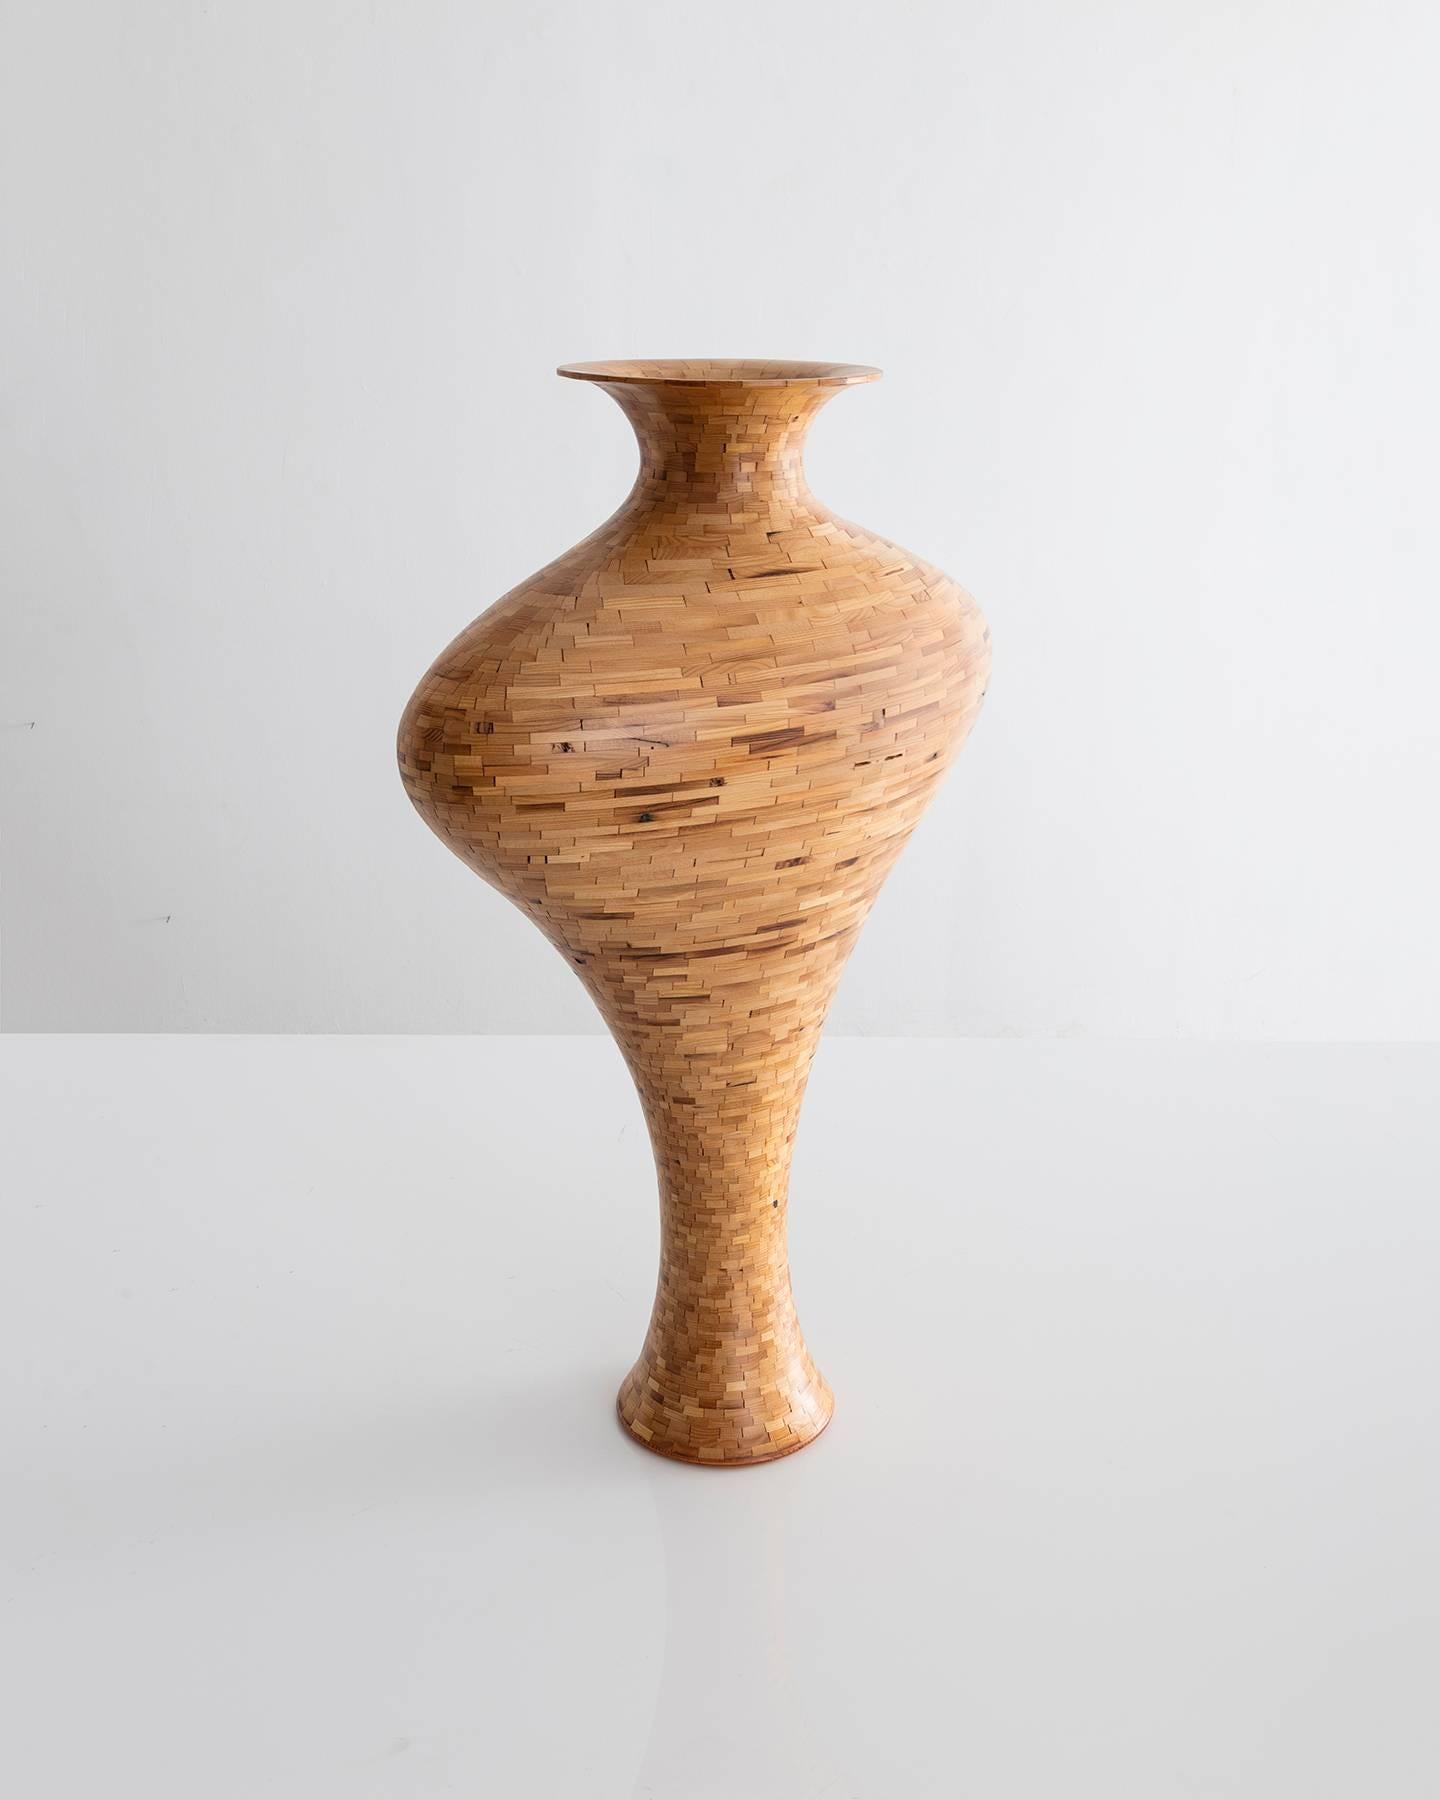 Part of Richard Haining's Stacked Collection, this vase was made using reclaimed Douglas fir salvaged from an Industrial farm building in the NYC area. The wood's natural coloring shows off tones ranging from light yellows and blonde to dark brown,